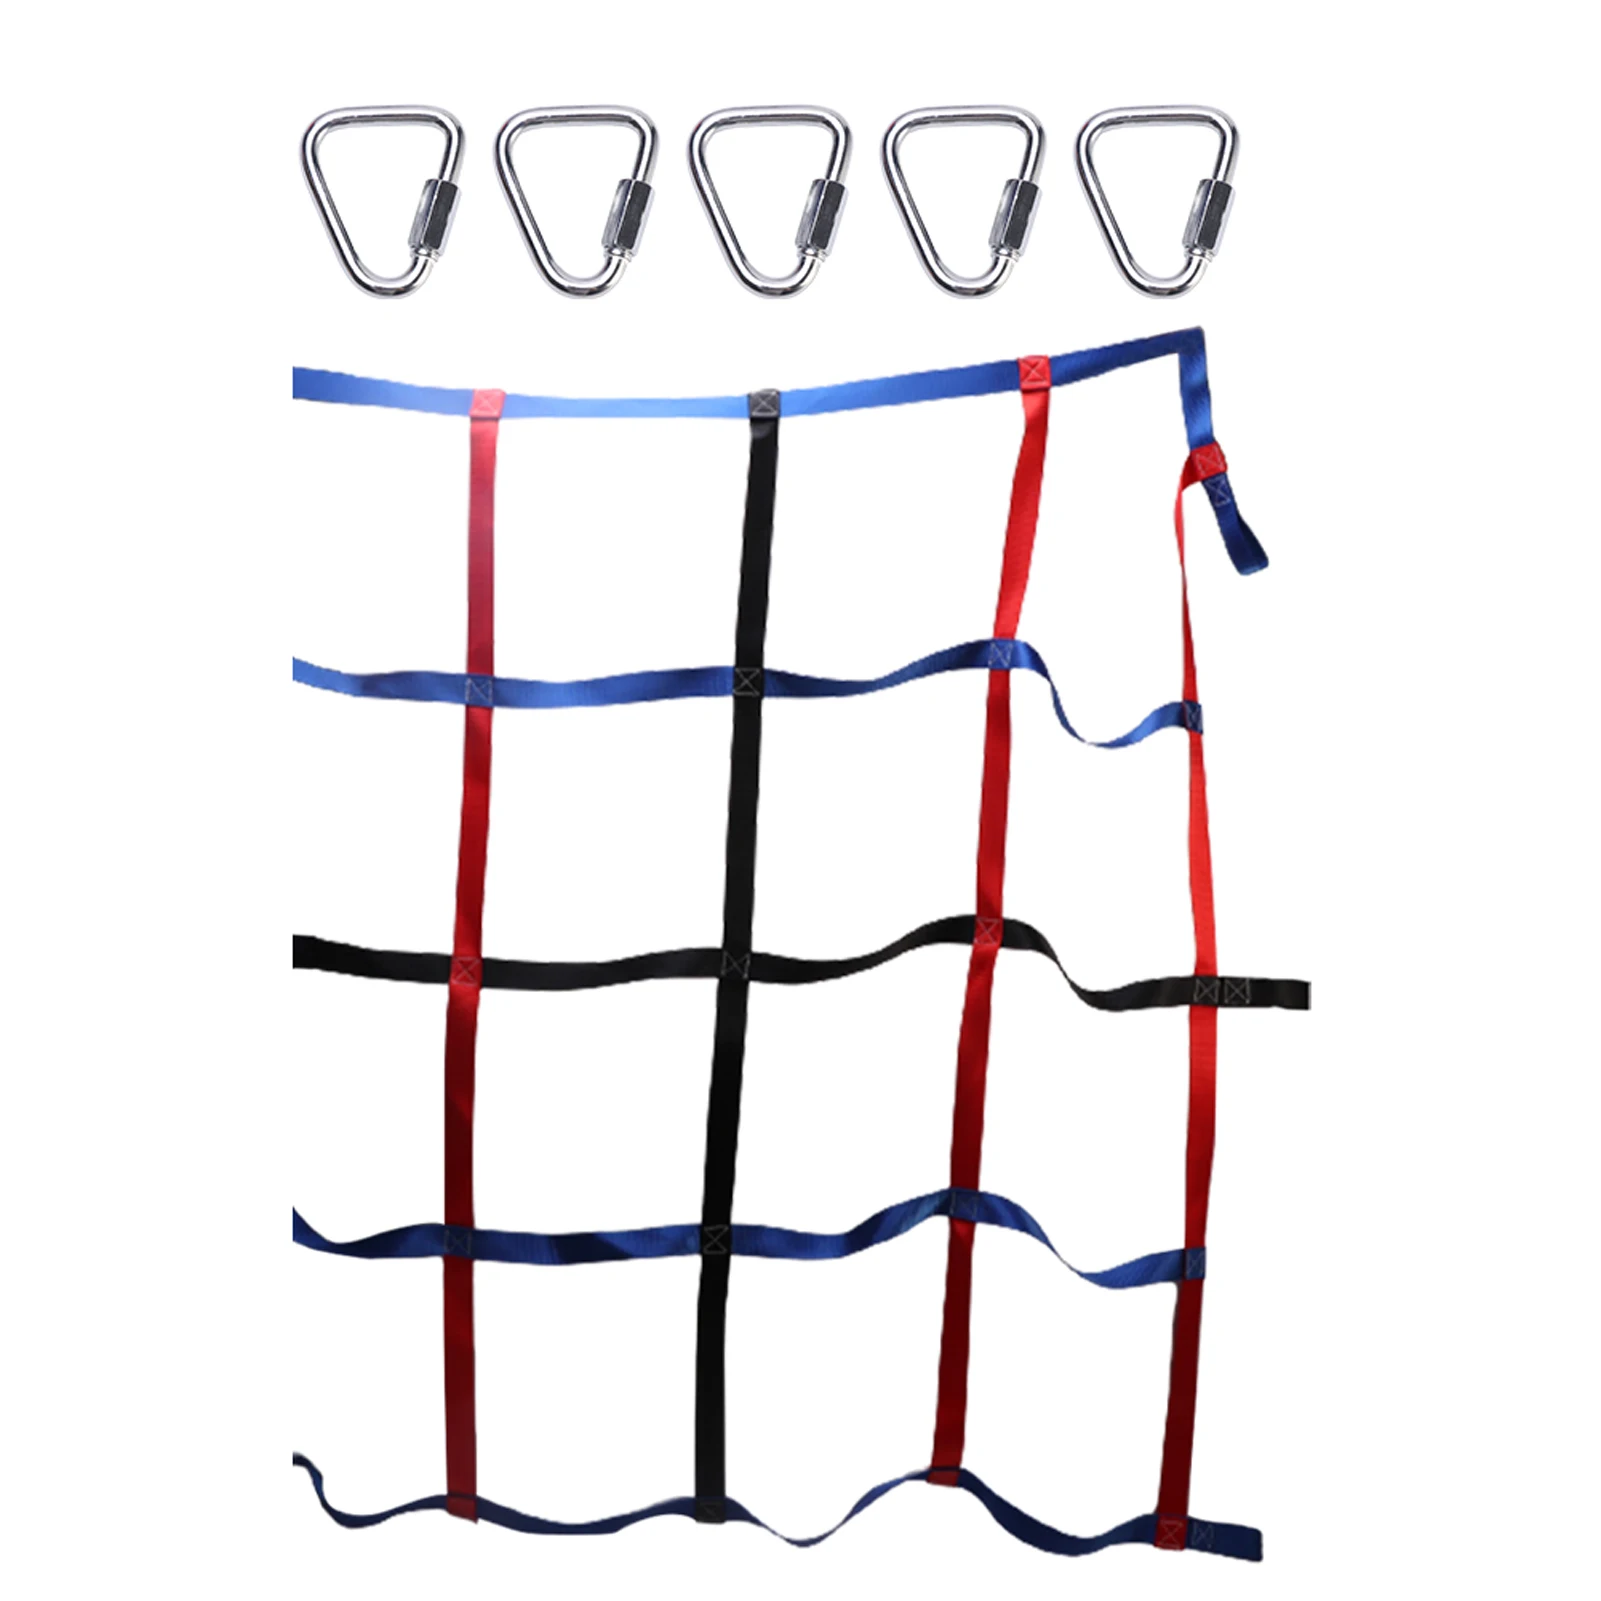 

For Kids Backyard Climbing Cargo Net Polyester Playground Outdoor Rope Ladder Training Equipment Obstacle Course Swing Games